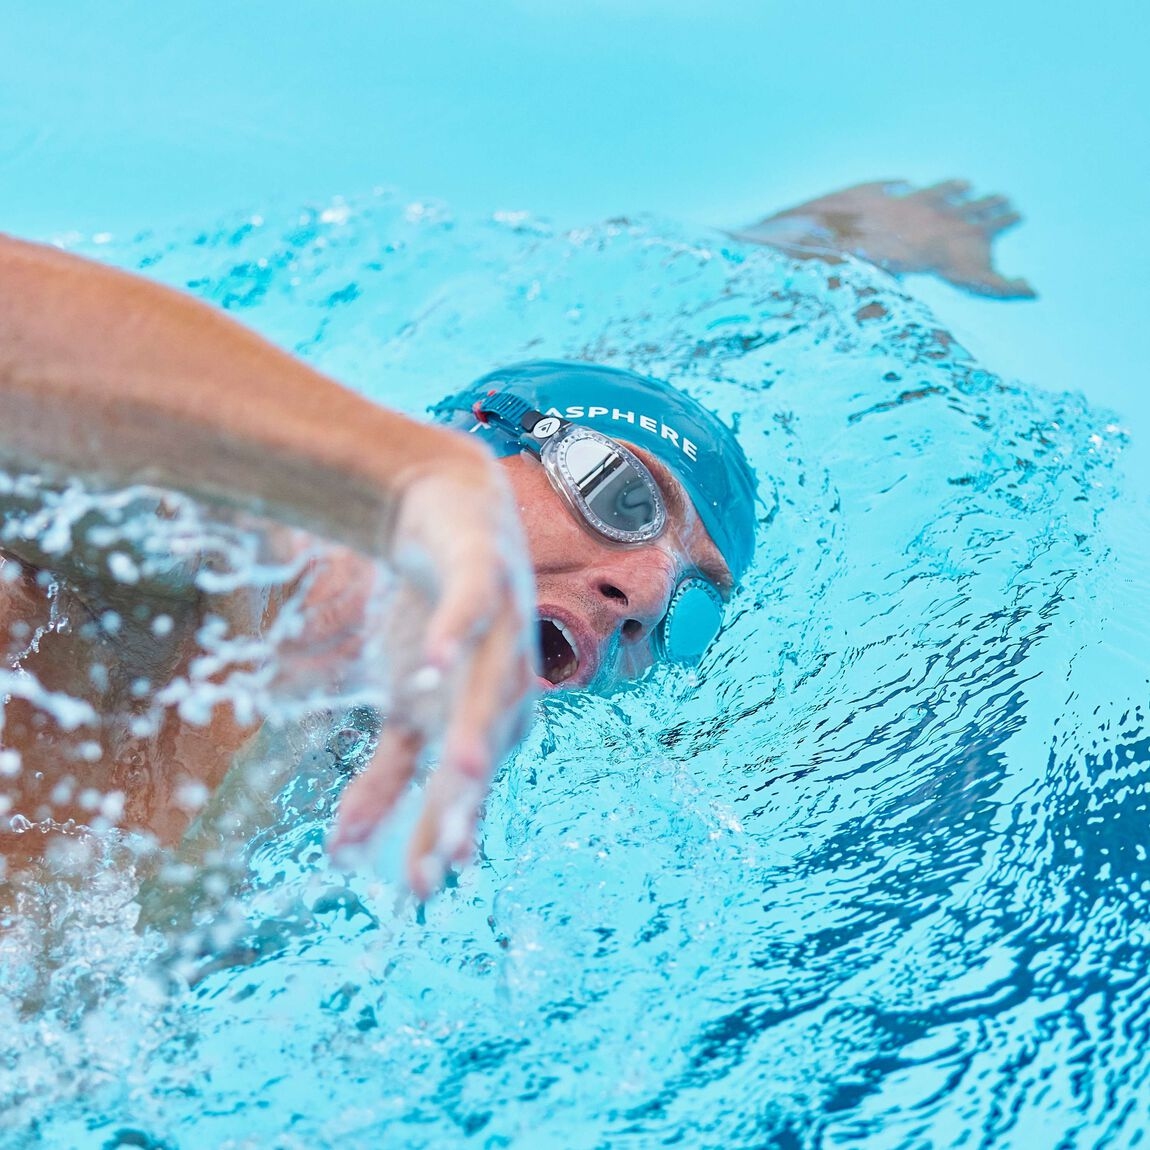 Smart swim goggles give you real-time metrics during your workout